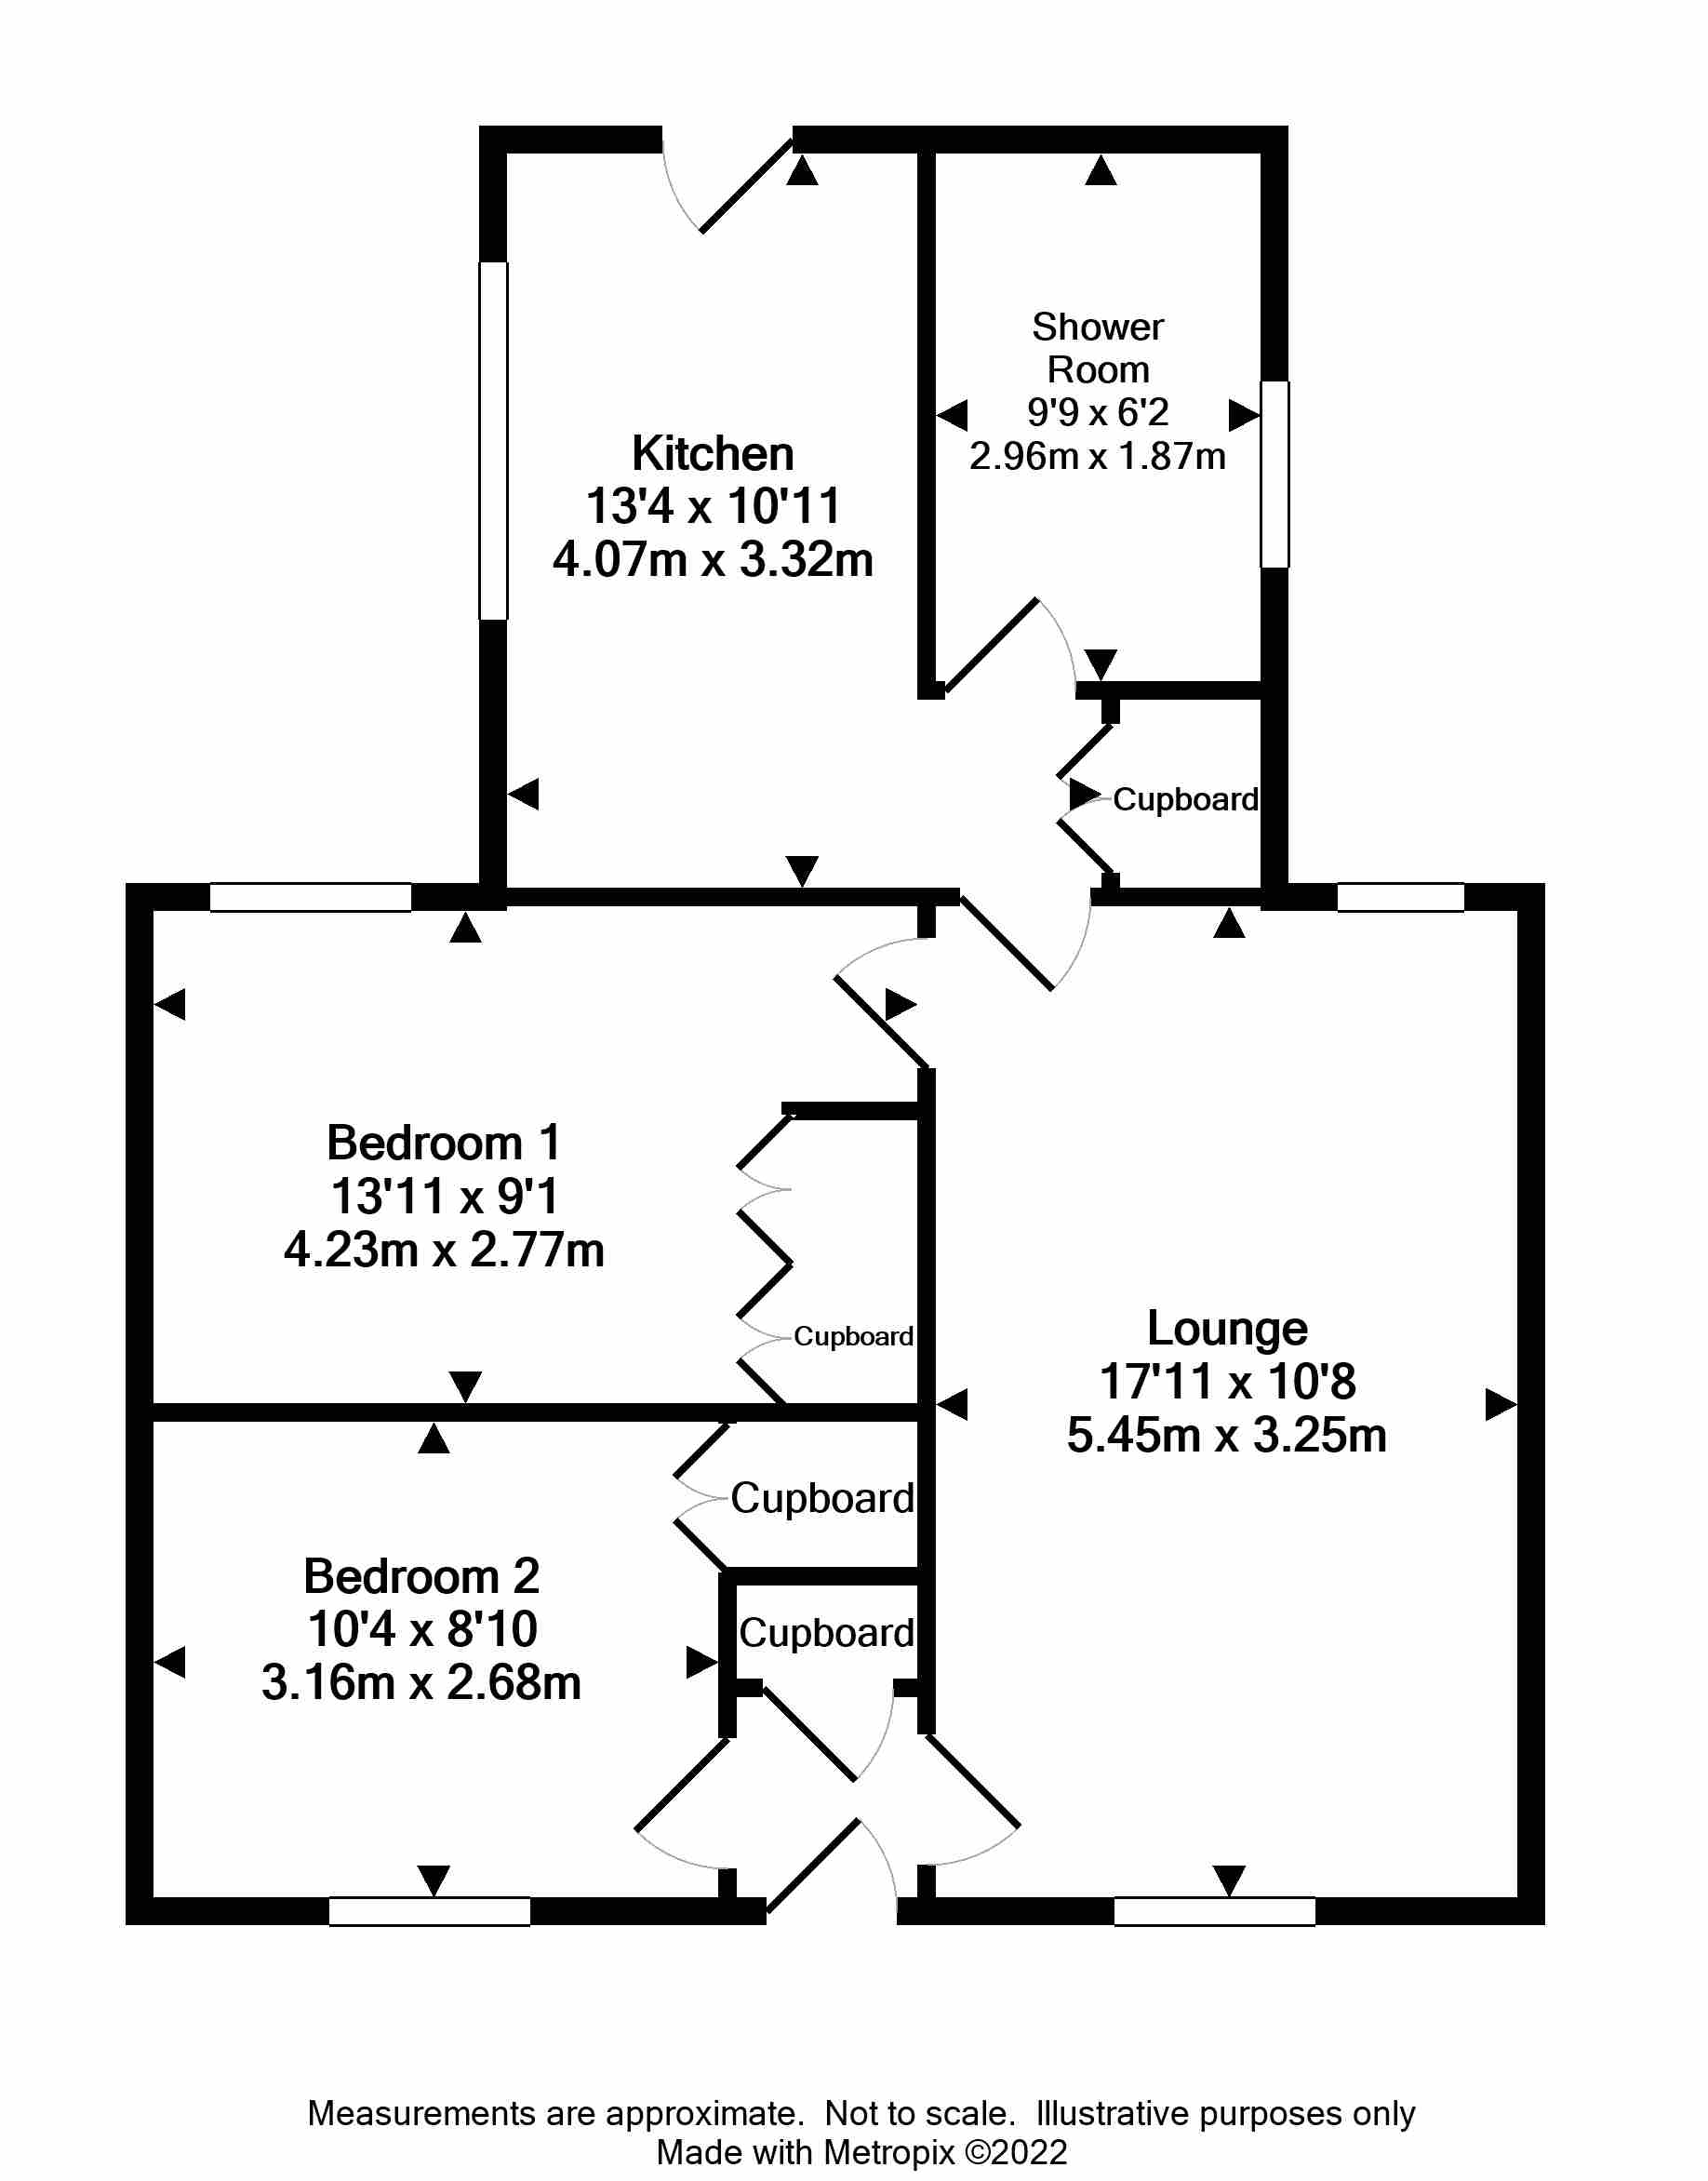 Floor Plan for 'Dusty Hollow', Challoch Cottage